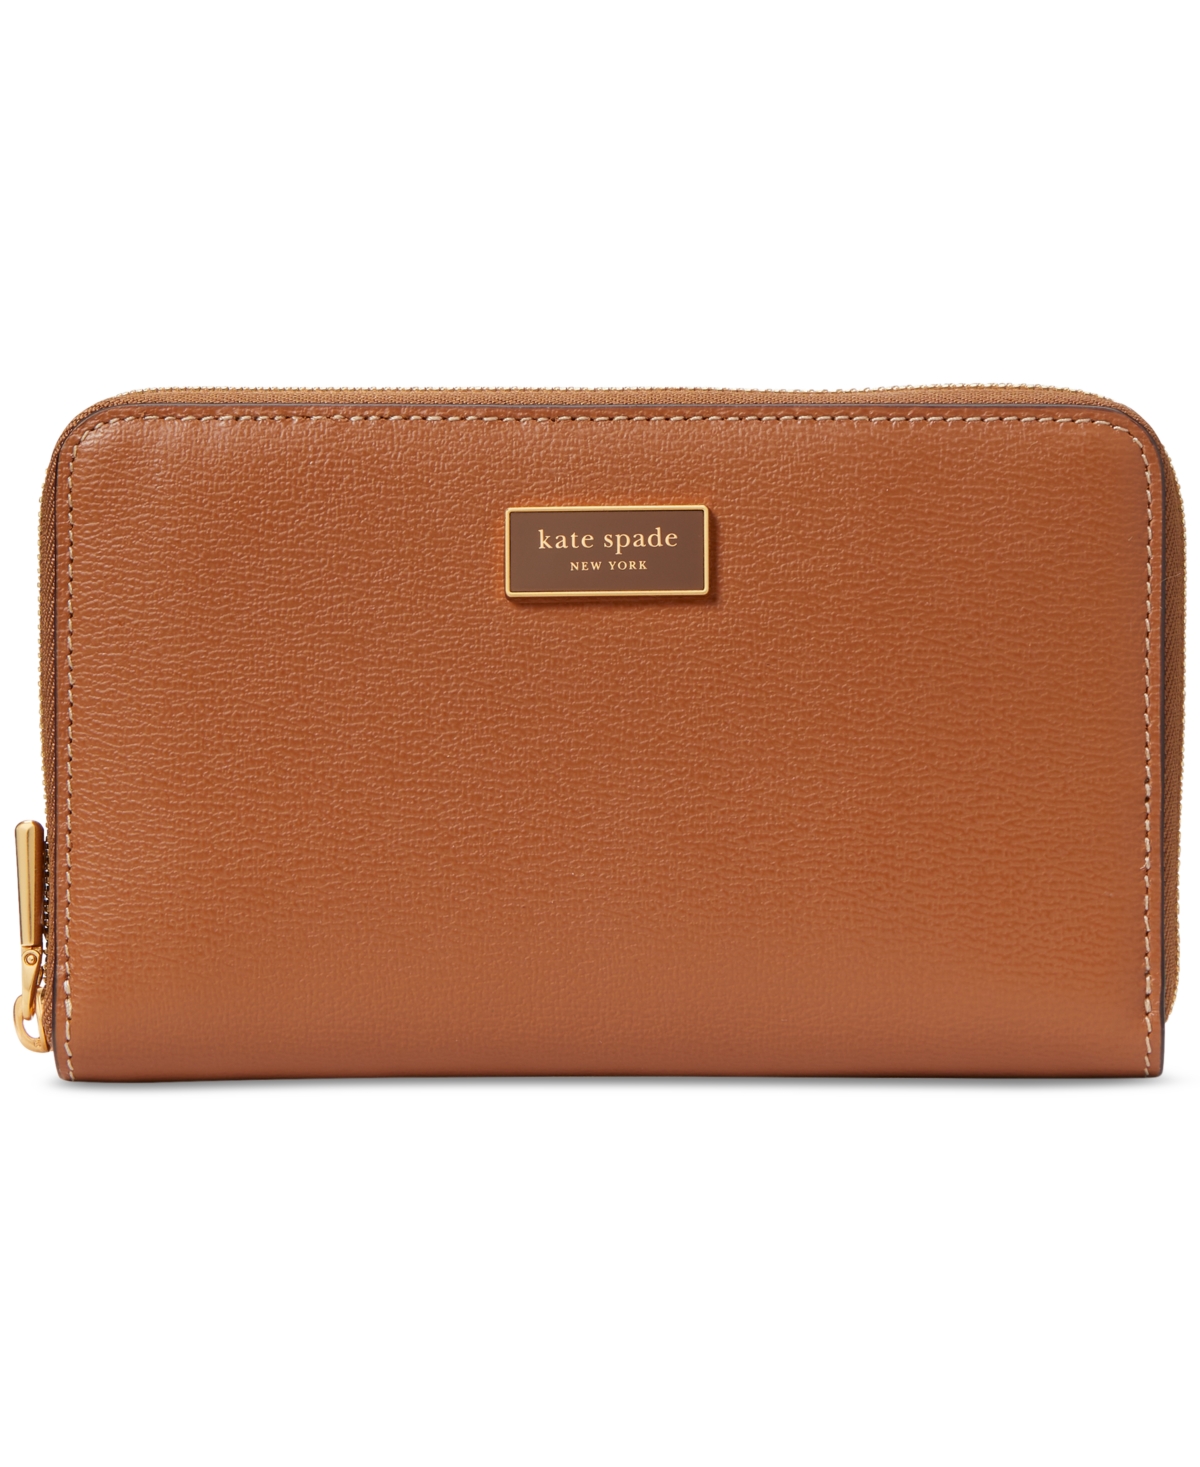 Kate Spade Katy Textured Leather Zip Around Wallet In Allspice Cake